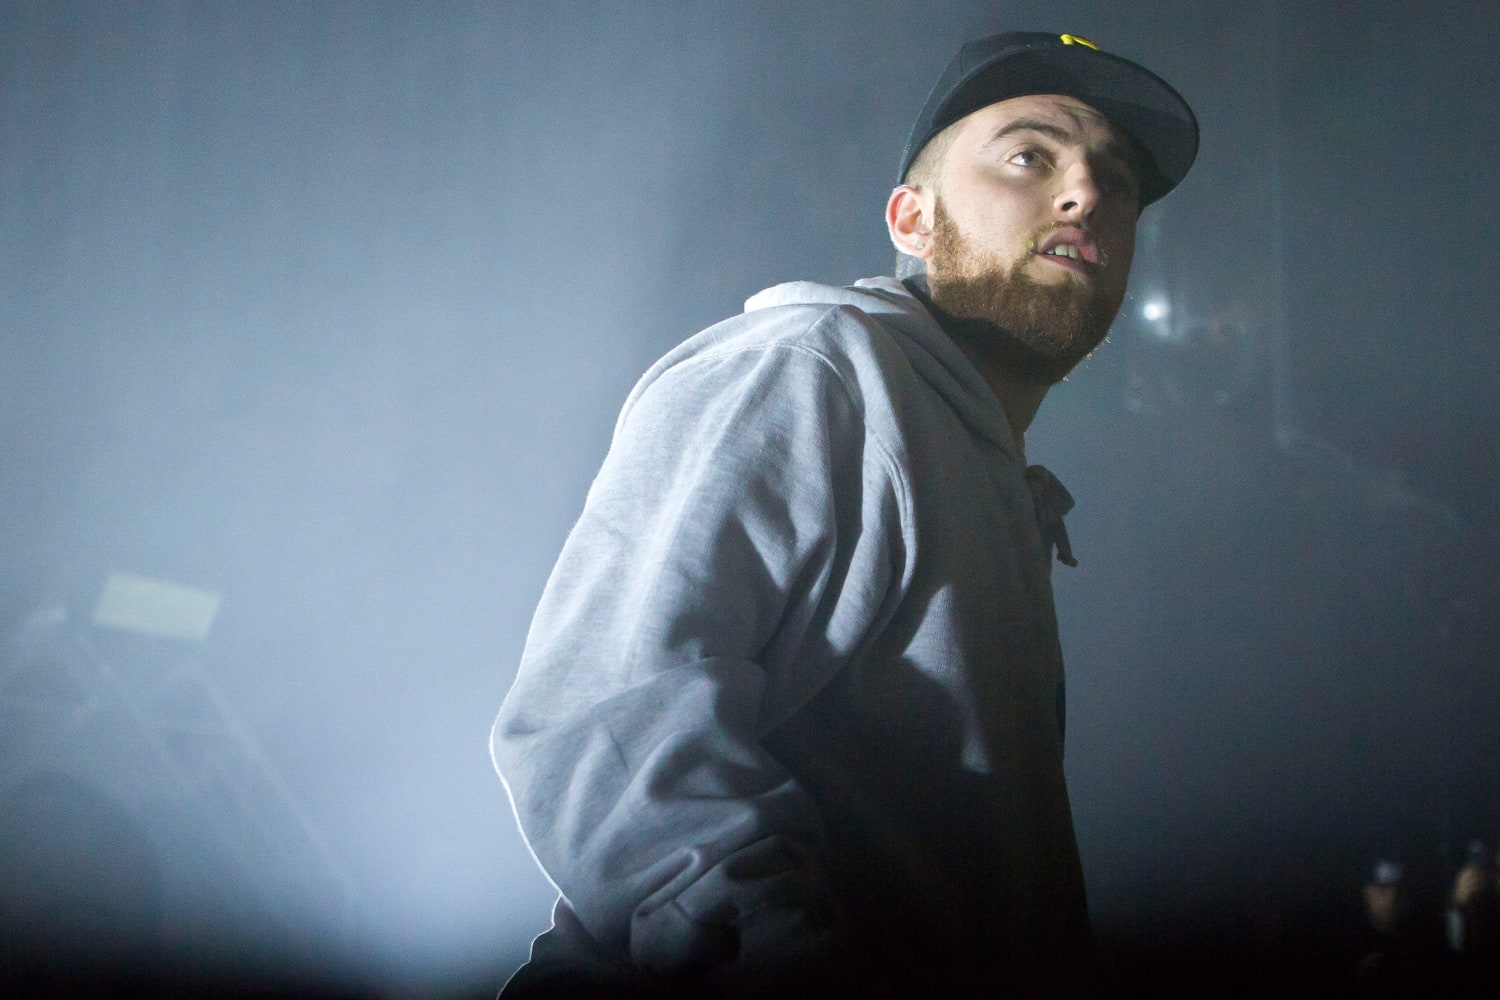 Mac Miller's Last Days and Life After Death